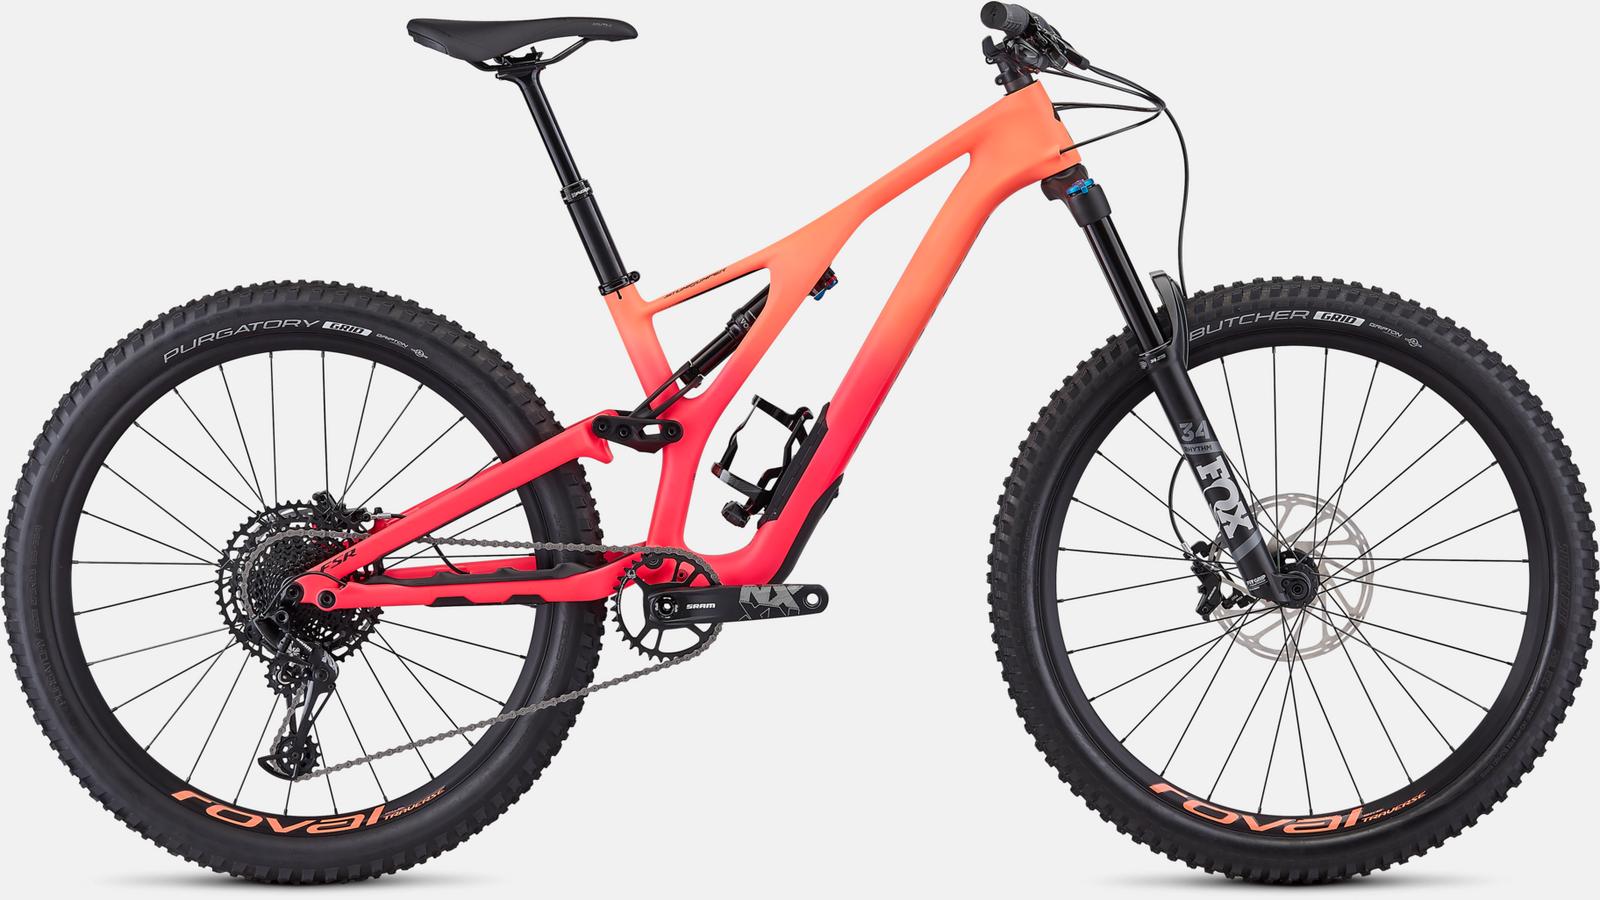 Touch-up paint for 2019 Specialized Women's Stumpjumper Comp Carbon 27.5 12-speed - Satin Acid Lava